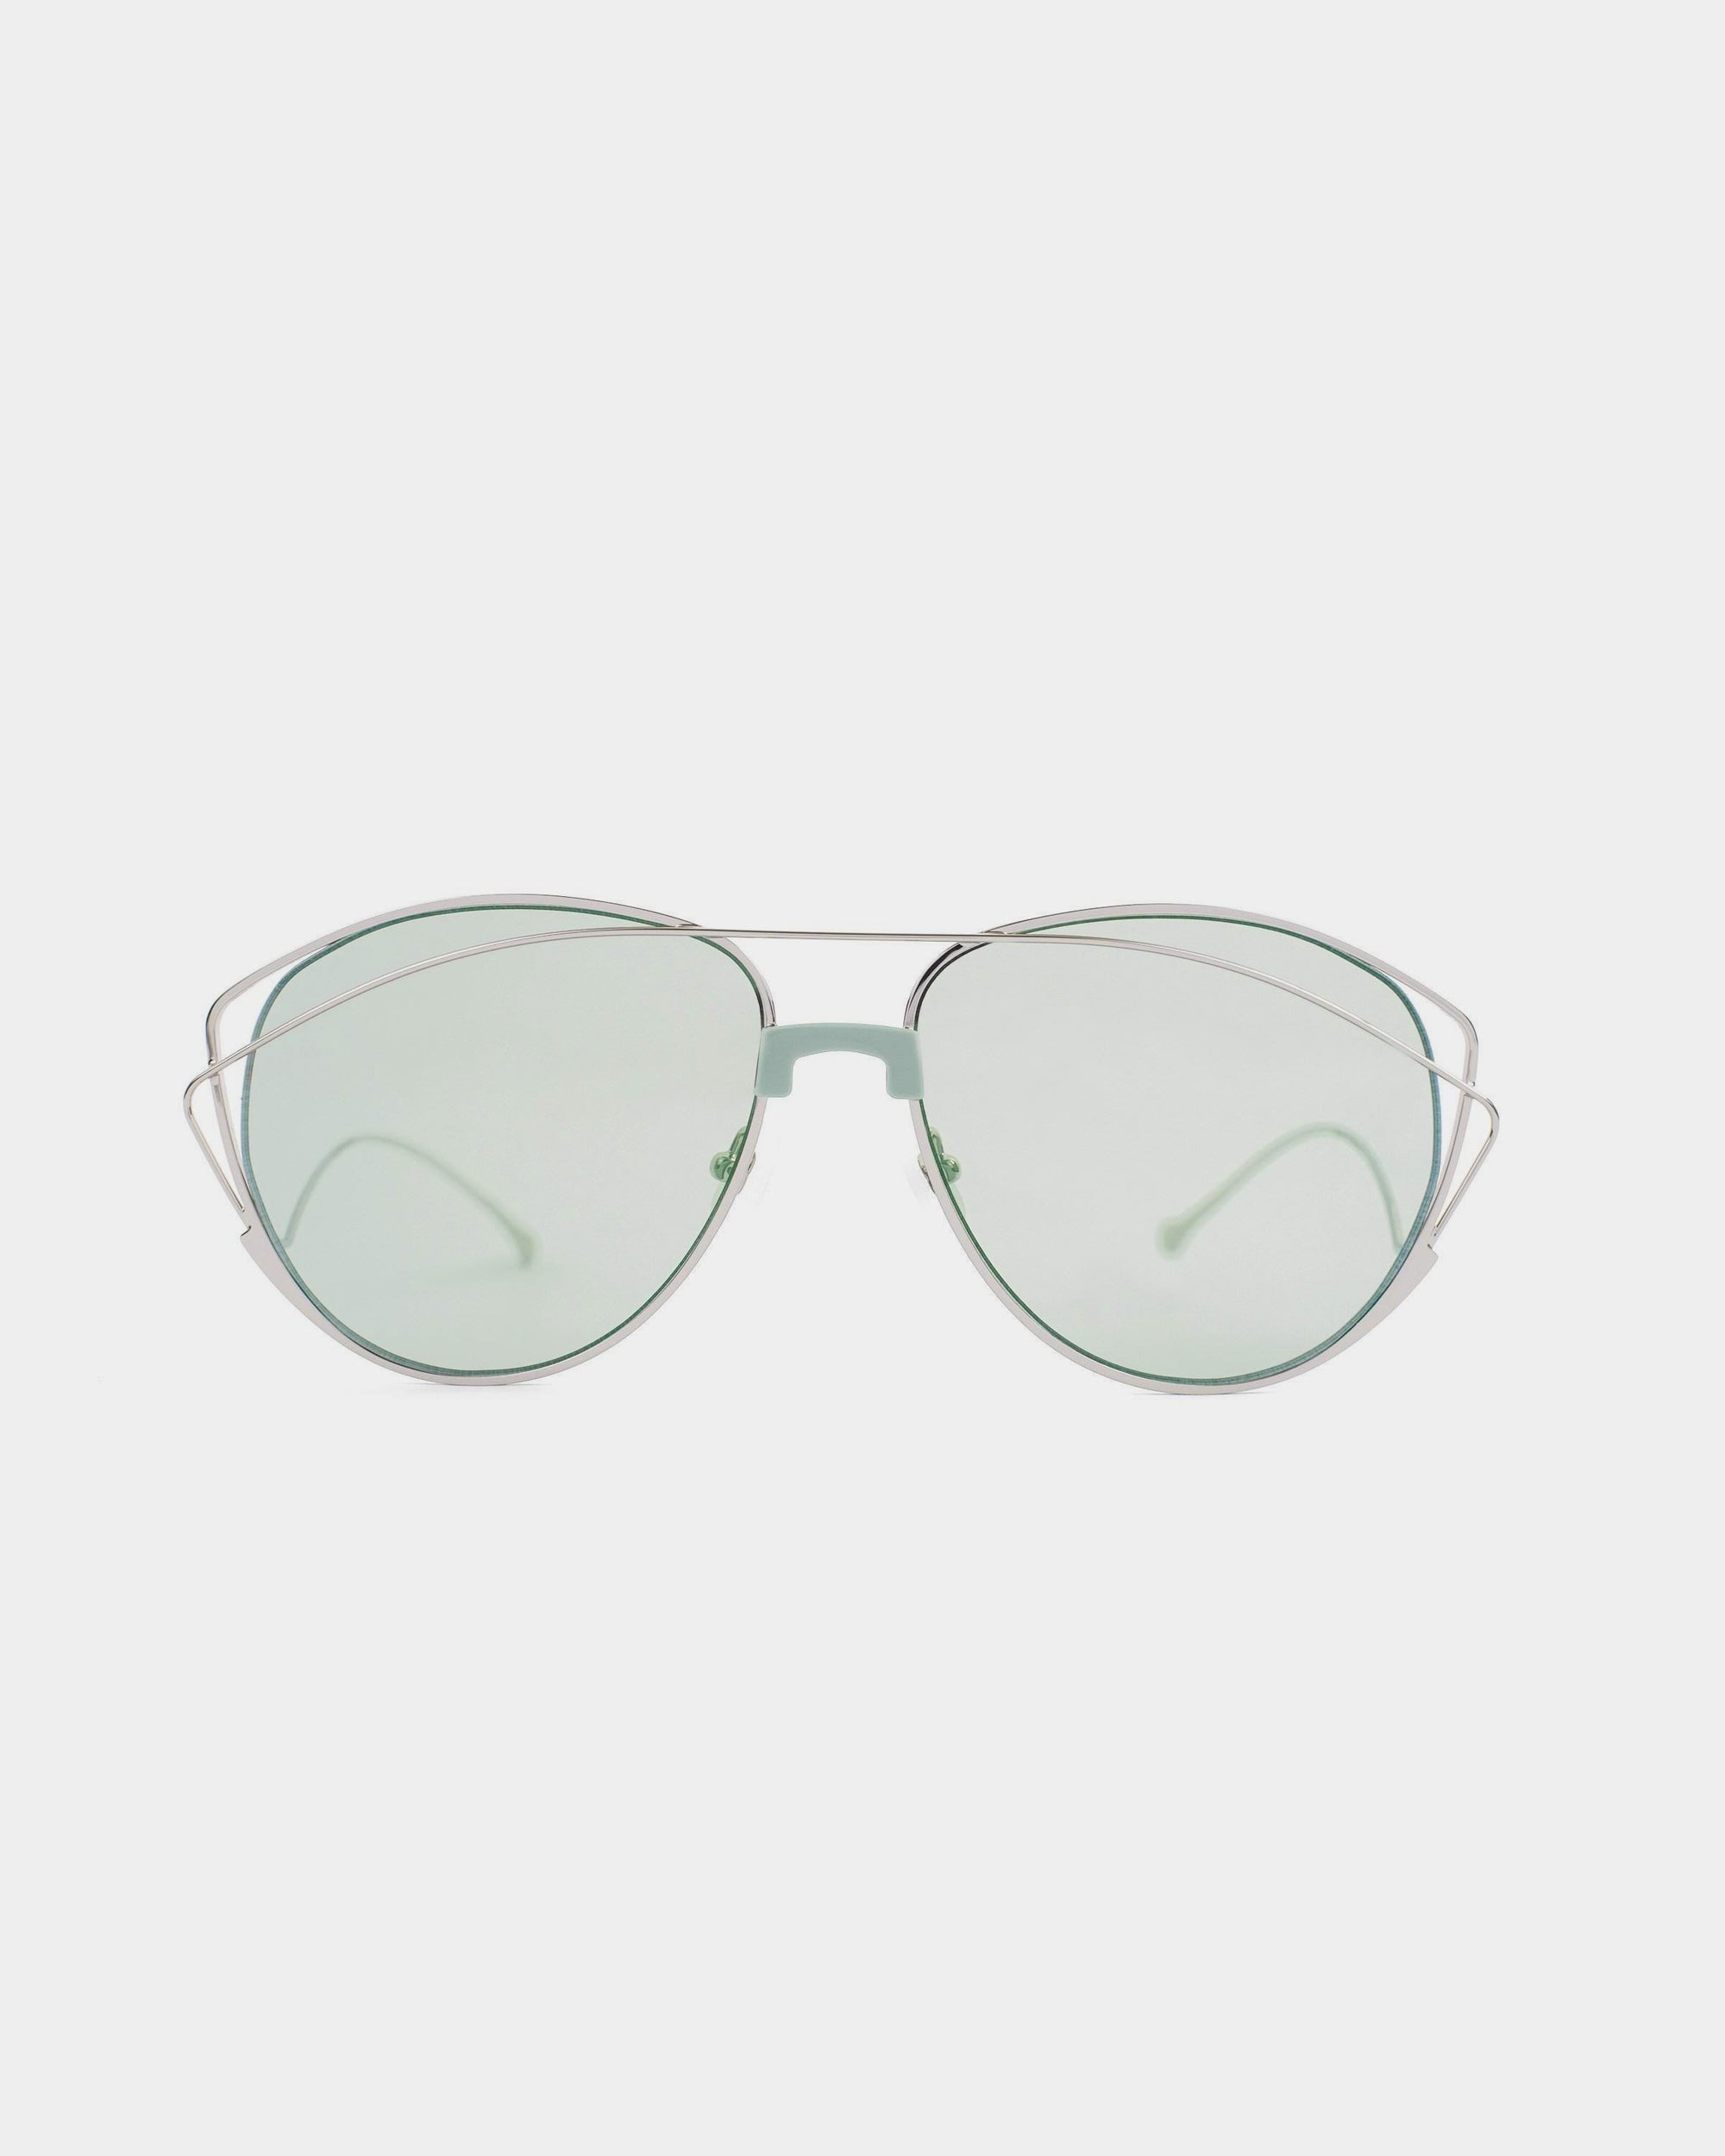 A pair of For Art&#39;s Sake® Dark Eyes aviator sunglasses with stainless steel frames and light green nylon lenses, featuring a unique double-layered design on the sides. The sunglasses offer 100% UV protection and are shown against a plain white background.